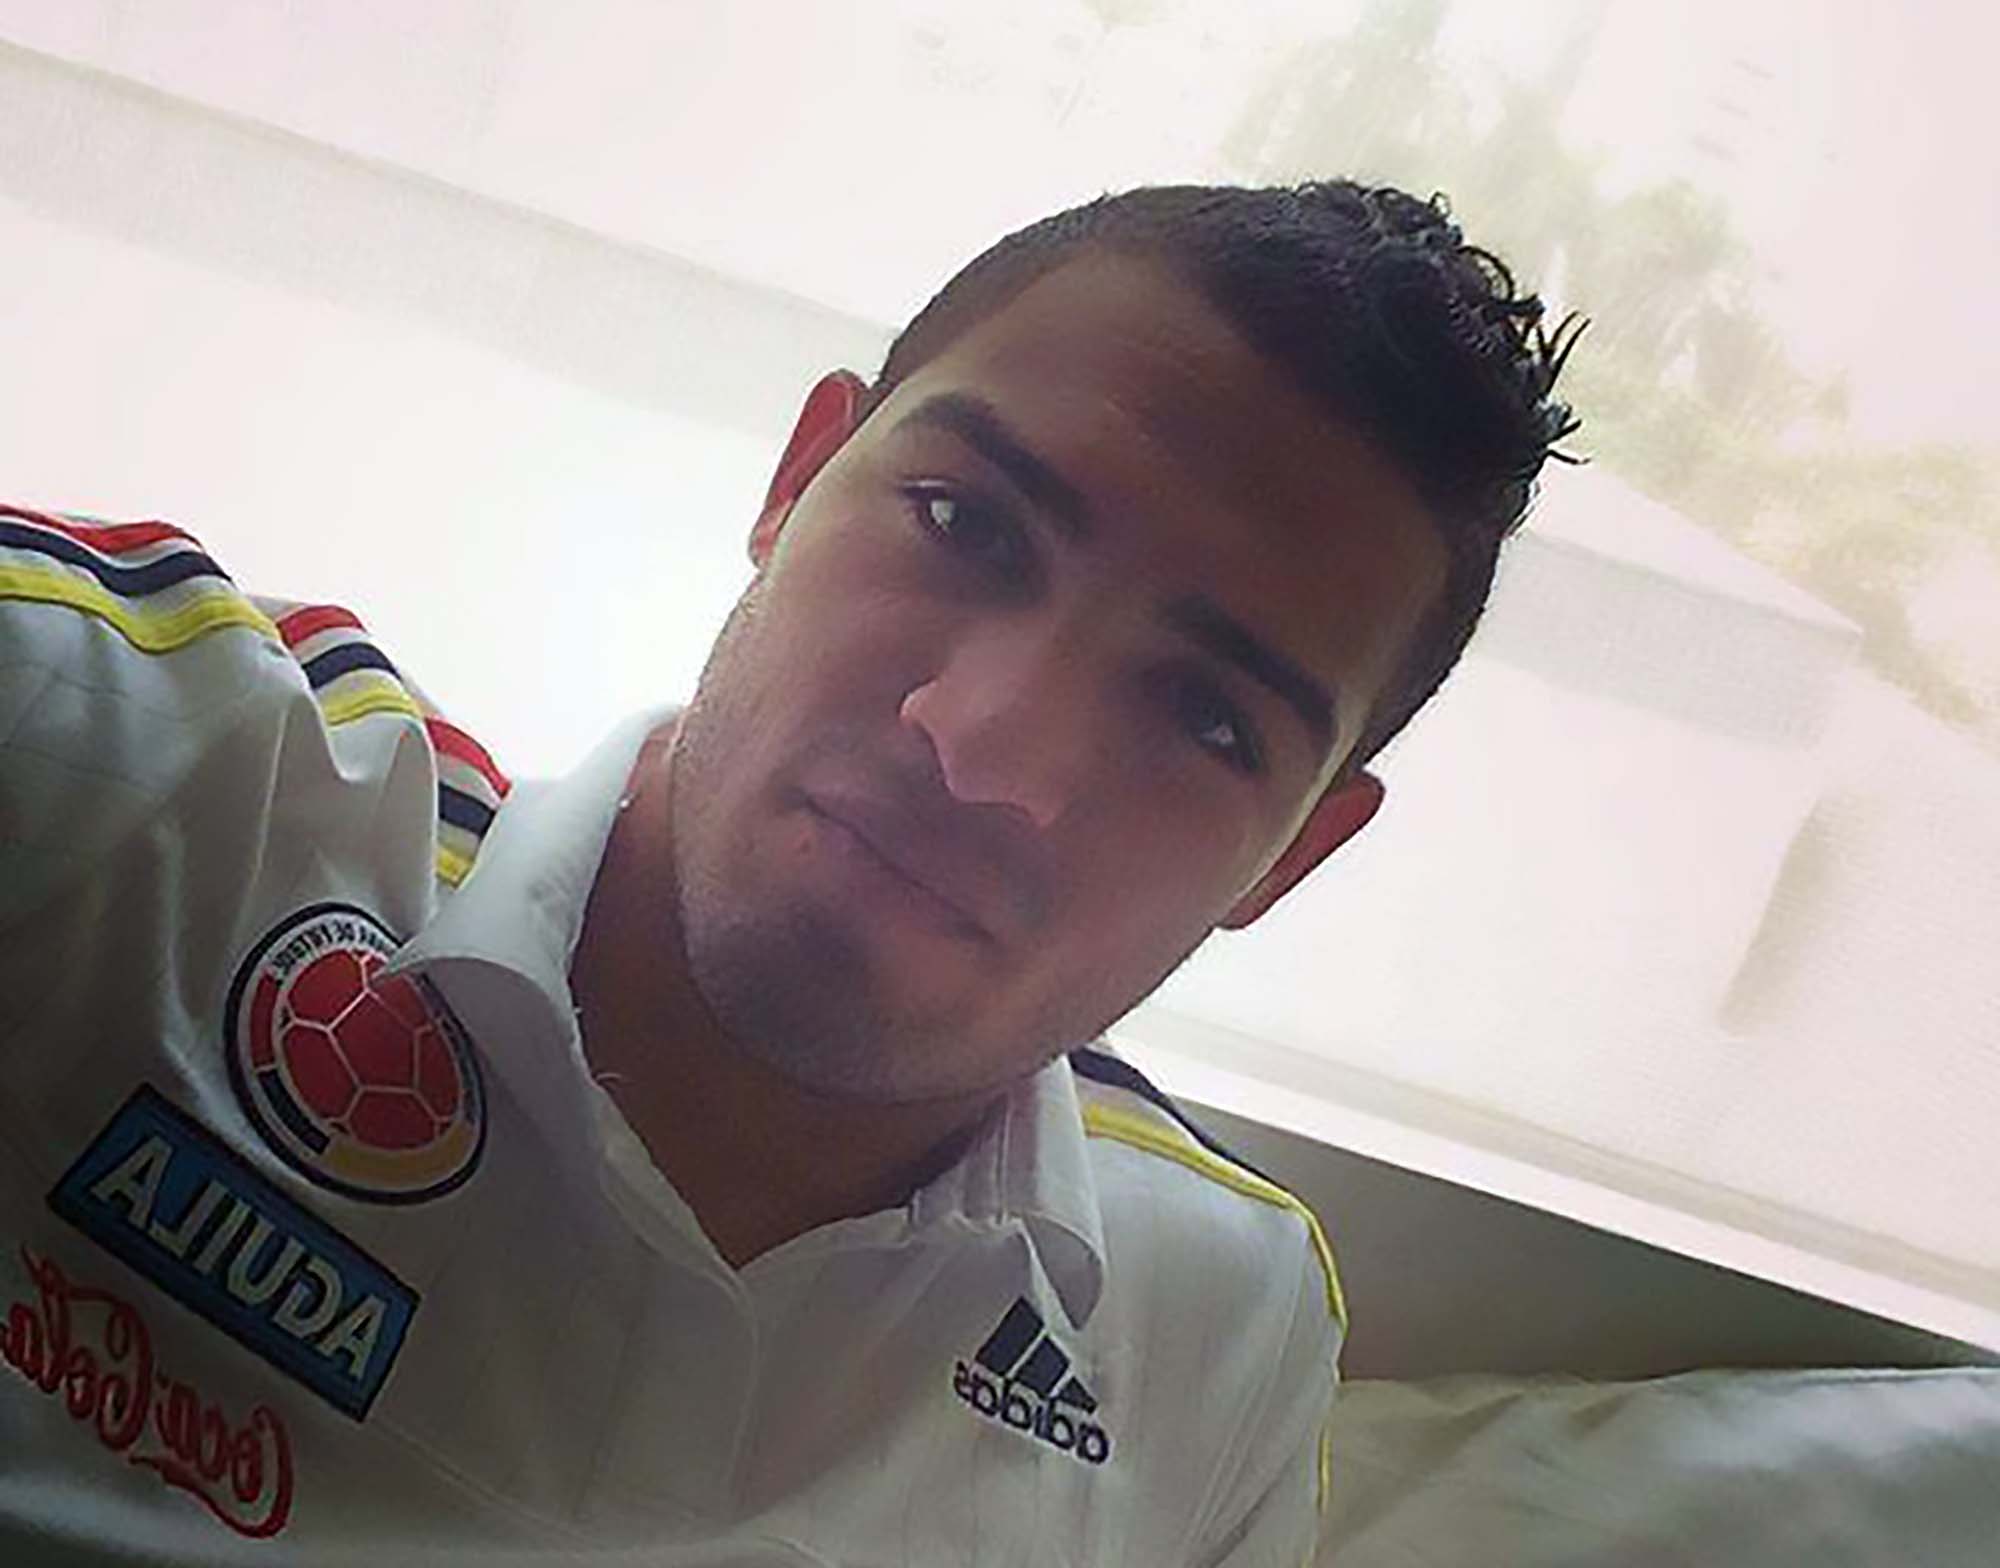 Read more about the article Colombia Keeper Suspended After Testing Positive